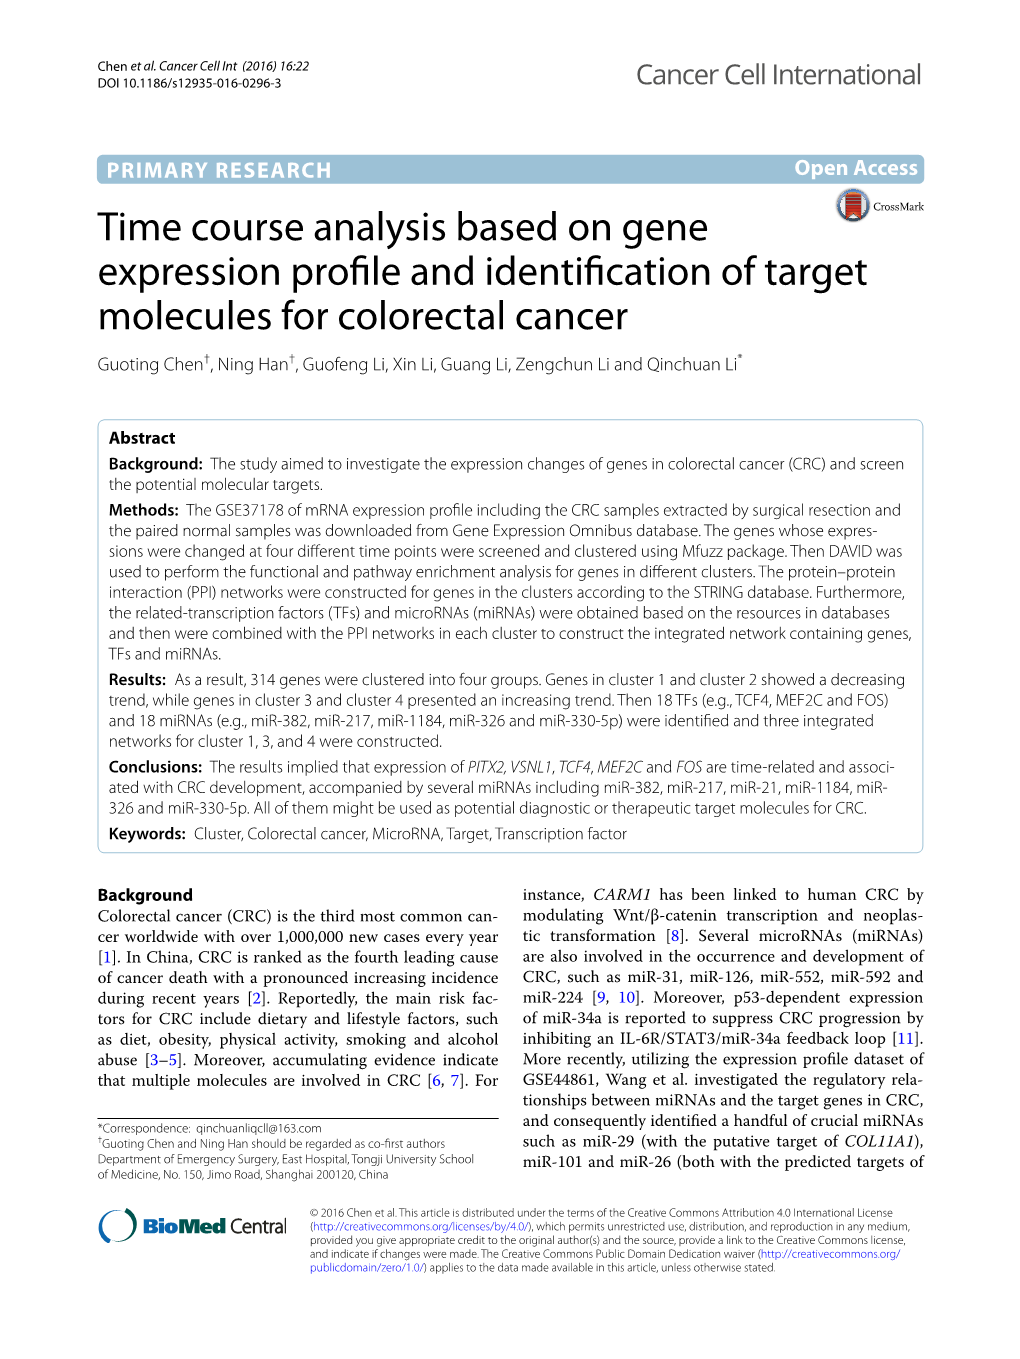 Time Course Analysis Based on Gene Expression Profile and Identification